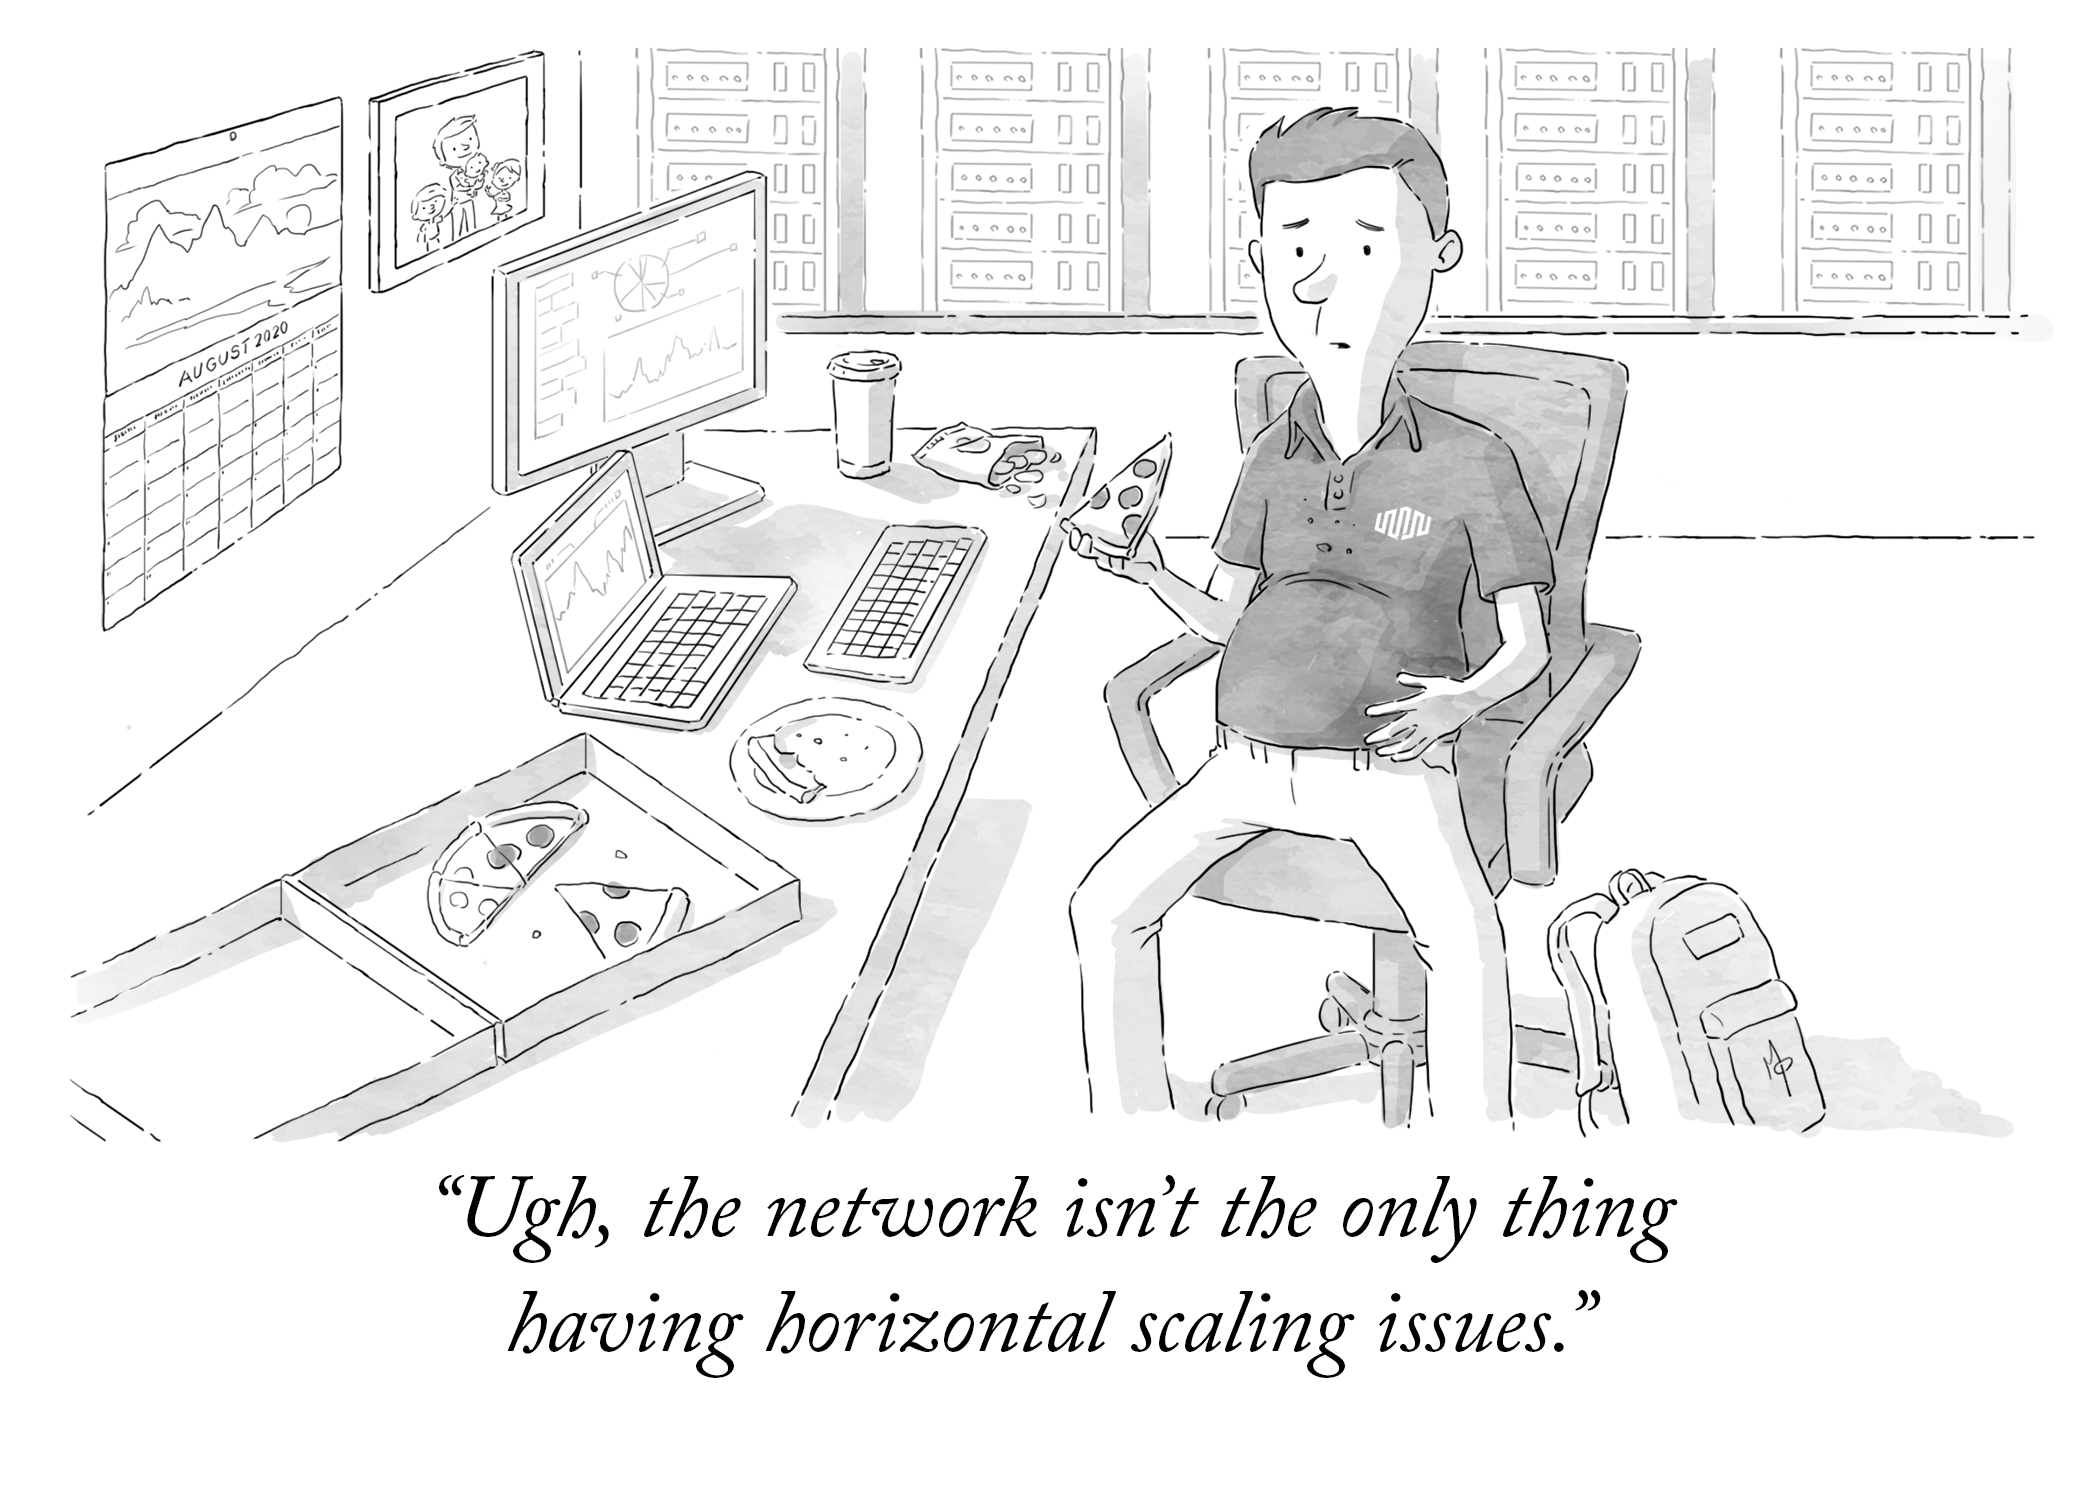 New Yorker style illustration of a data center staff eating his third pizza slice at his cubicle with a worried face while his other hand is touching his bloated stomach. The wall behind his monitor & laptop has his family photo and calendar. The caption reads: Ugh, the network isn't the only thing having horizontal scaling issues